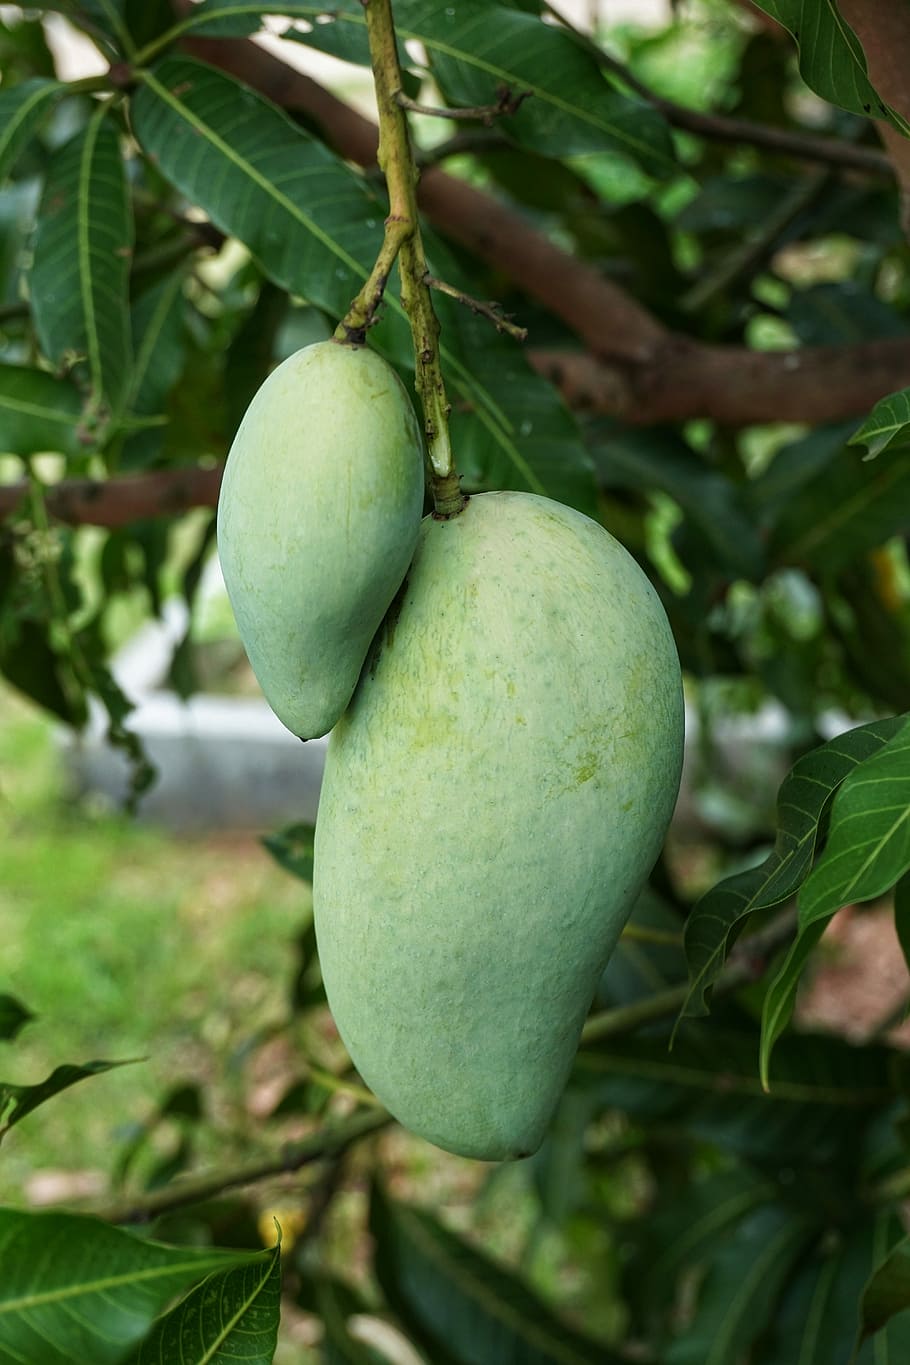 growing, green, mango, hanging, fruit, food, nature, tree, leaf, agriculture